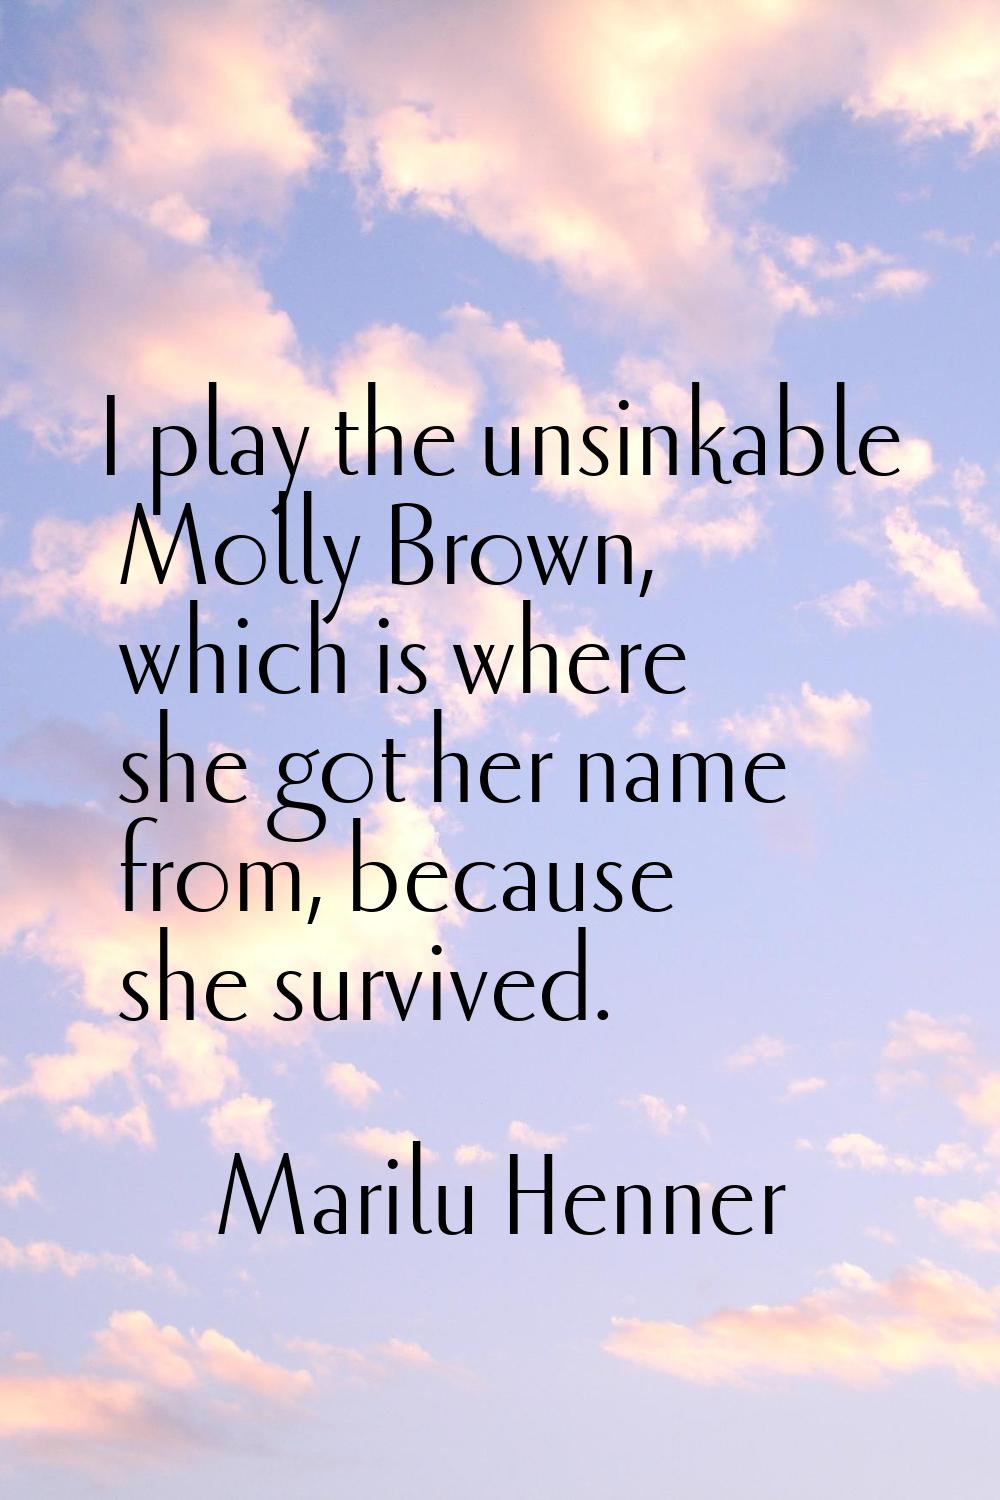 I play the unsinkable Molly Brown, which is where she got her name from, because she survived.